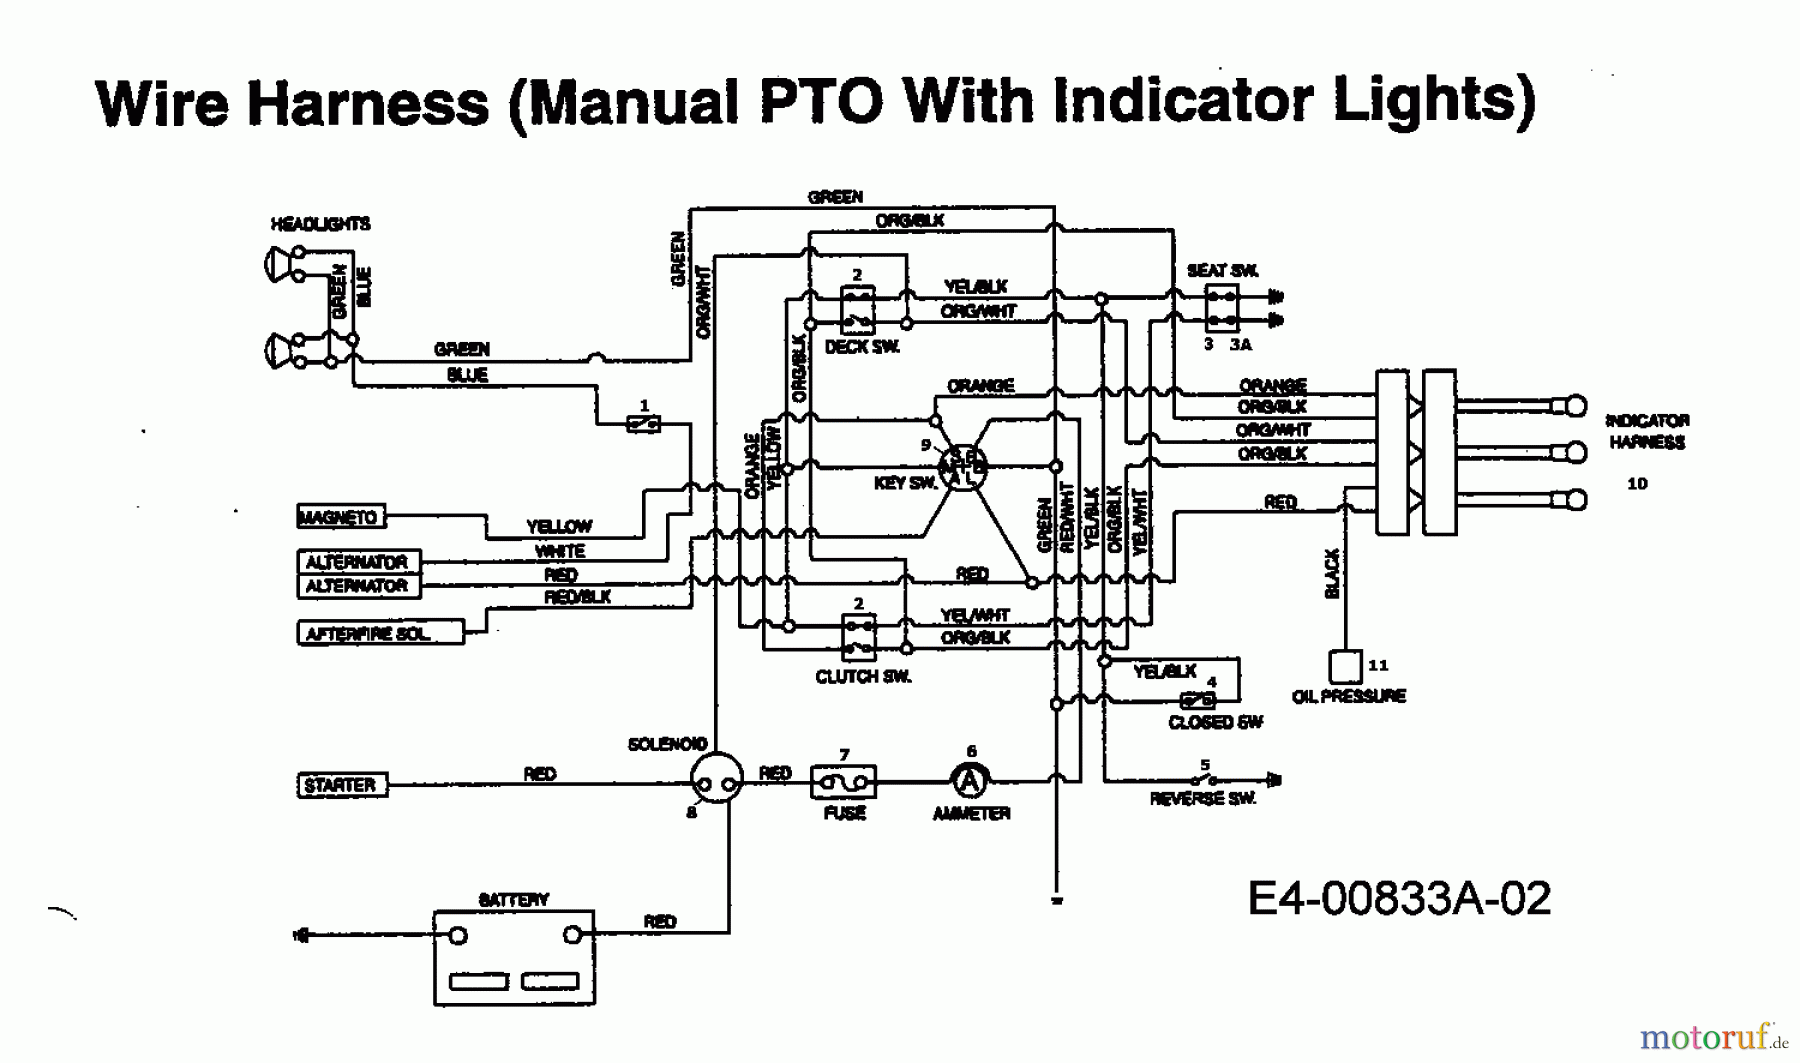  Gutbrod Lawn tractors Sprint SLX 102 RH 13DT796N690  (2000) Wiring diagram with indicator lights